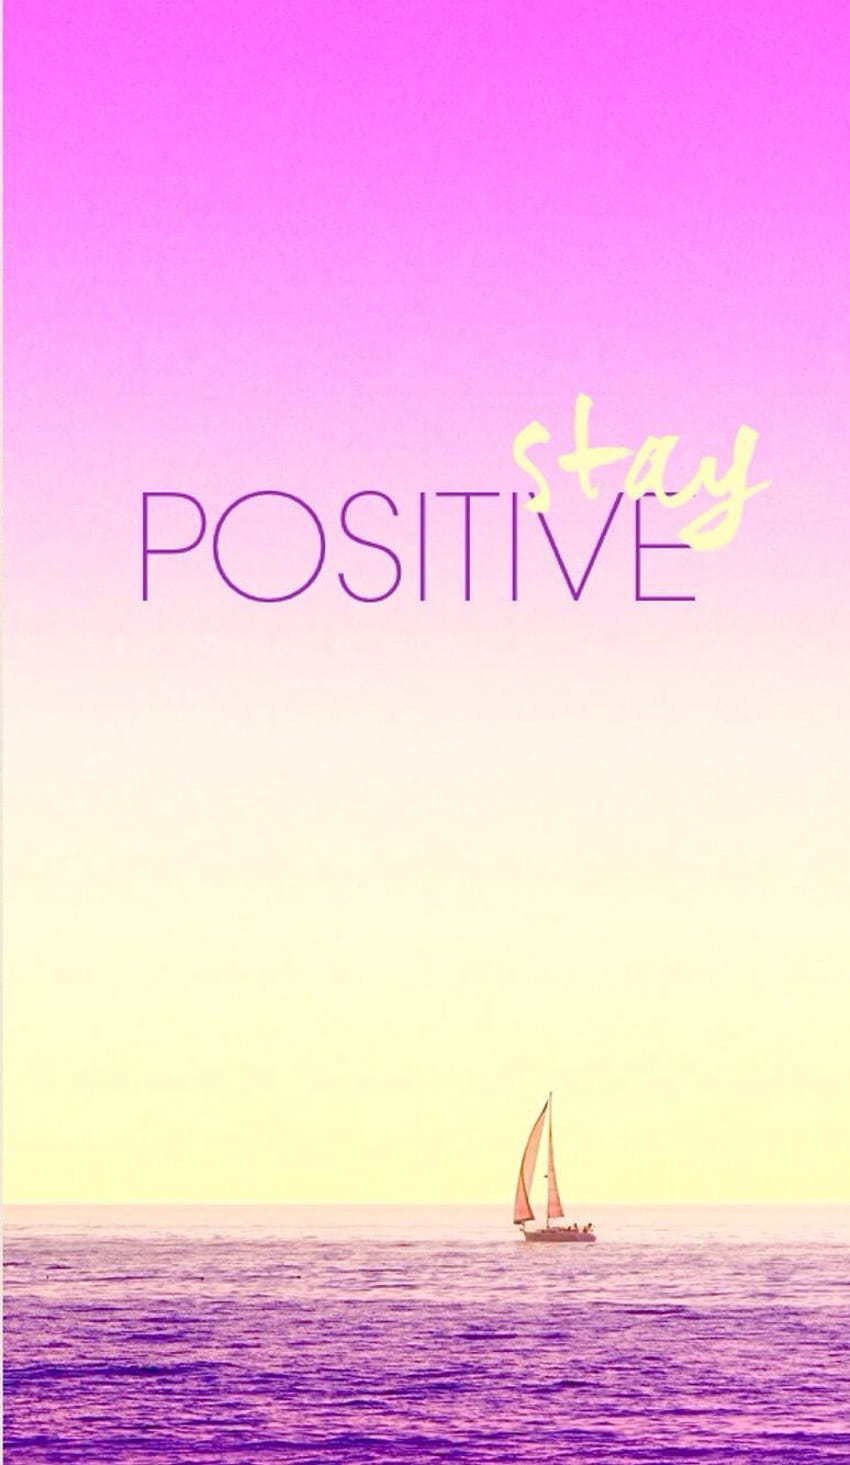 Stay Positive posted by Sarah Johnson, stay postive HD phone wallpaper